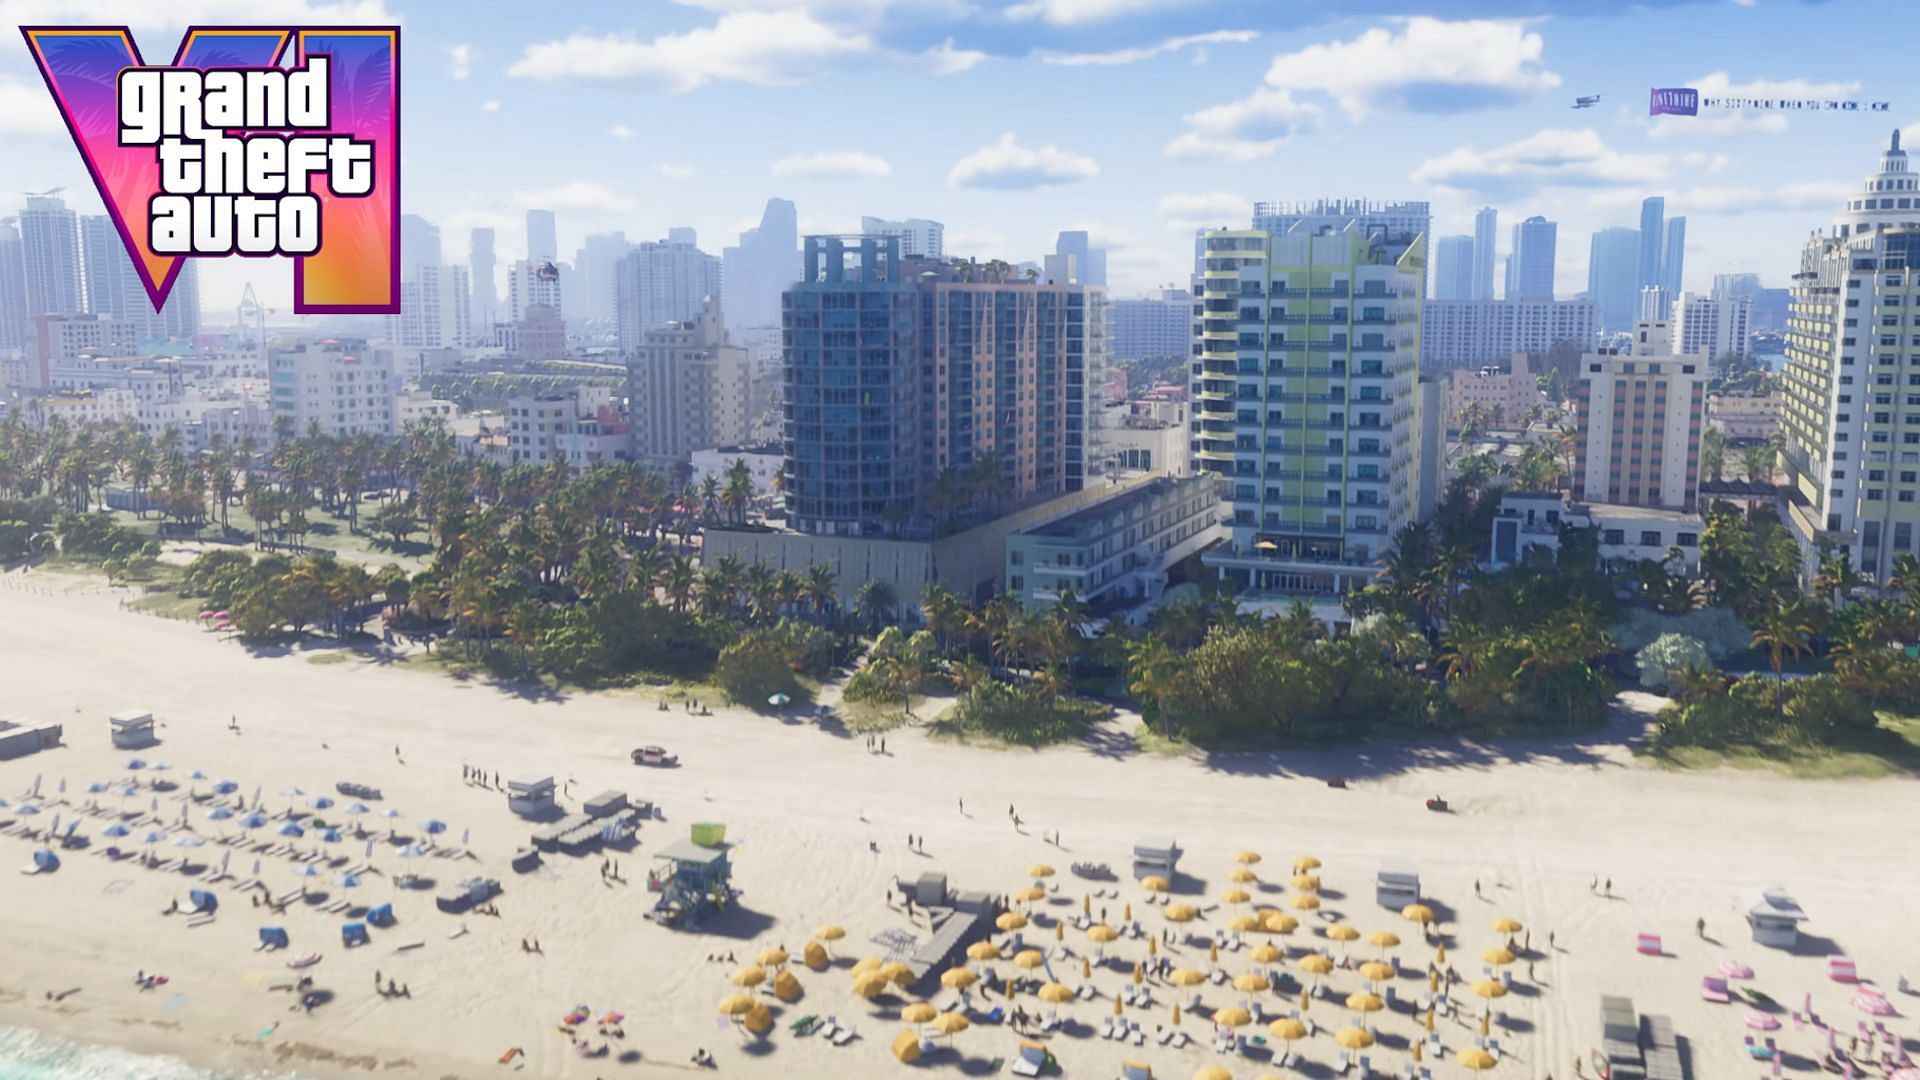 An overview of Vice City in Grand Theft Auto 6 (Image via Rockstar Games)